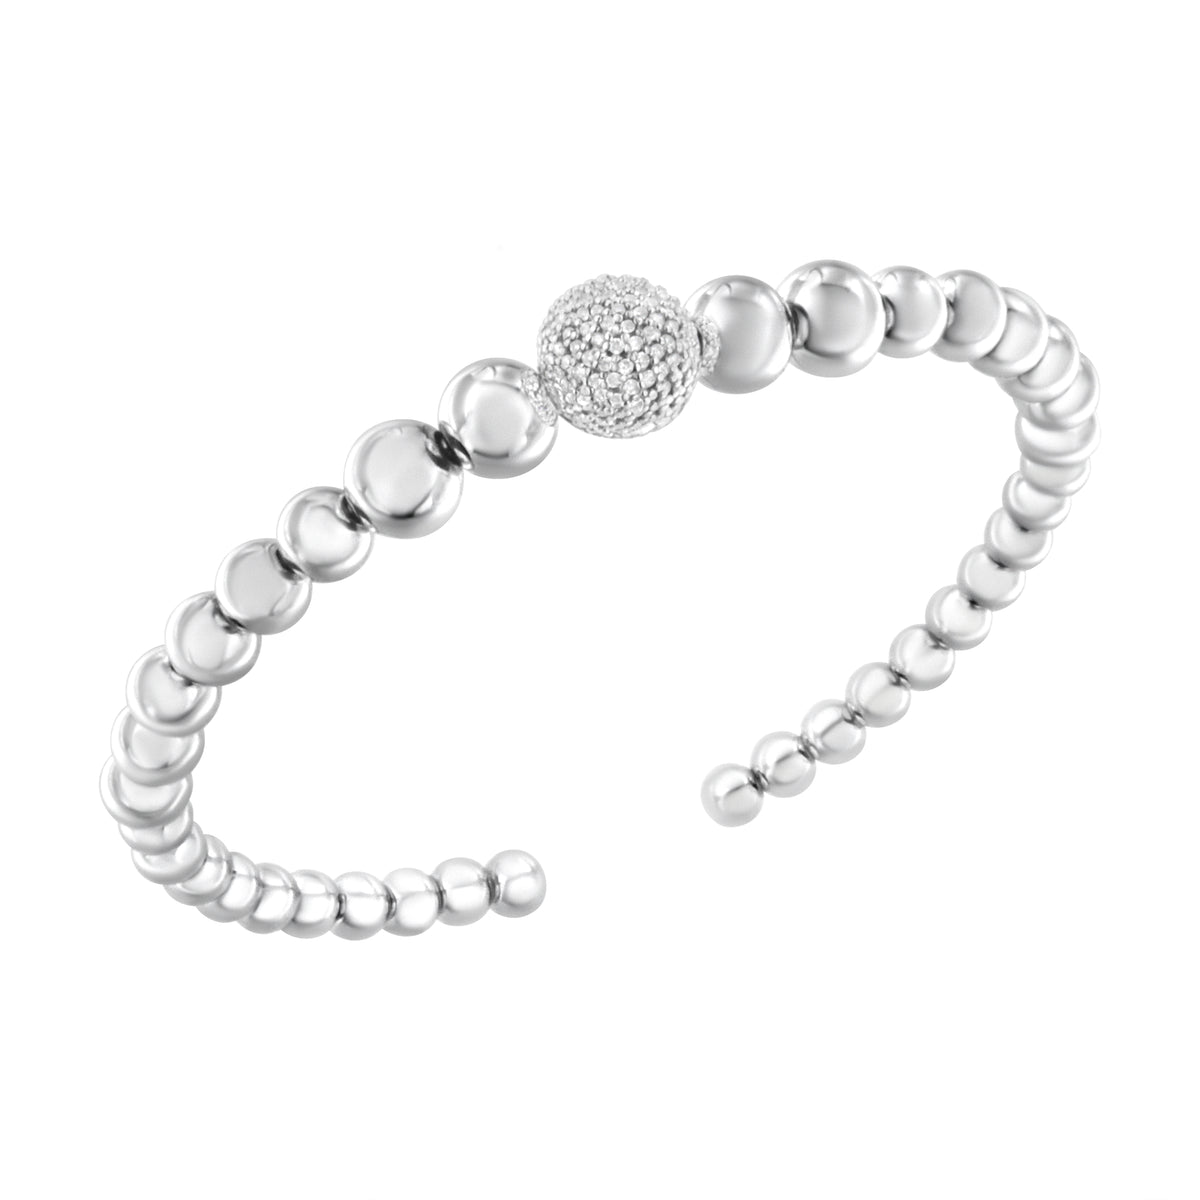 .925 Sterling Silver 1/6 Cttw Diamond Rondelle Graduated Ball Bead Cuff Bangle Bracelet (I-J color, I2-I3 clarity)-Fits wrists up to 7 1/2 inches-1